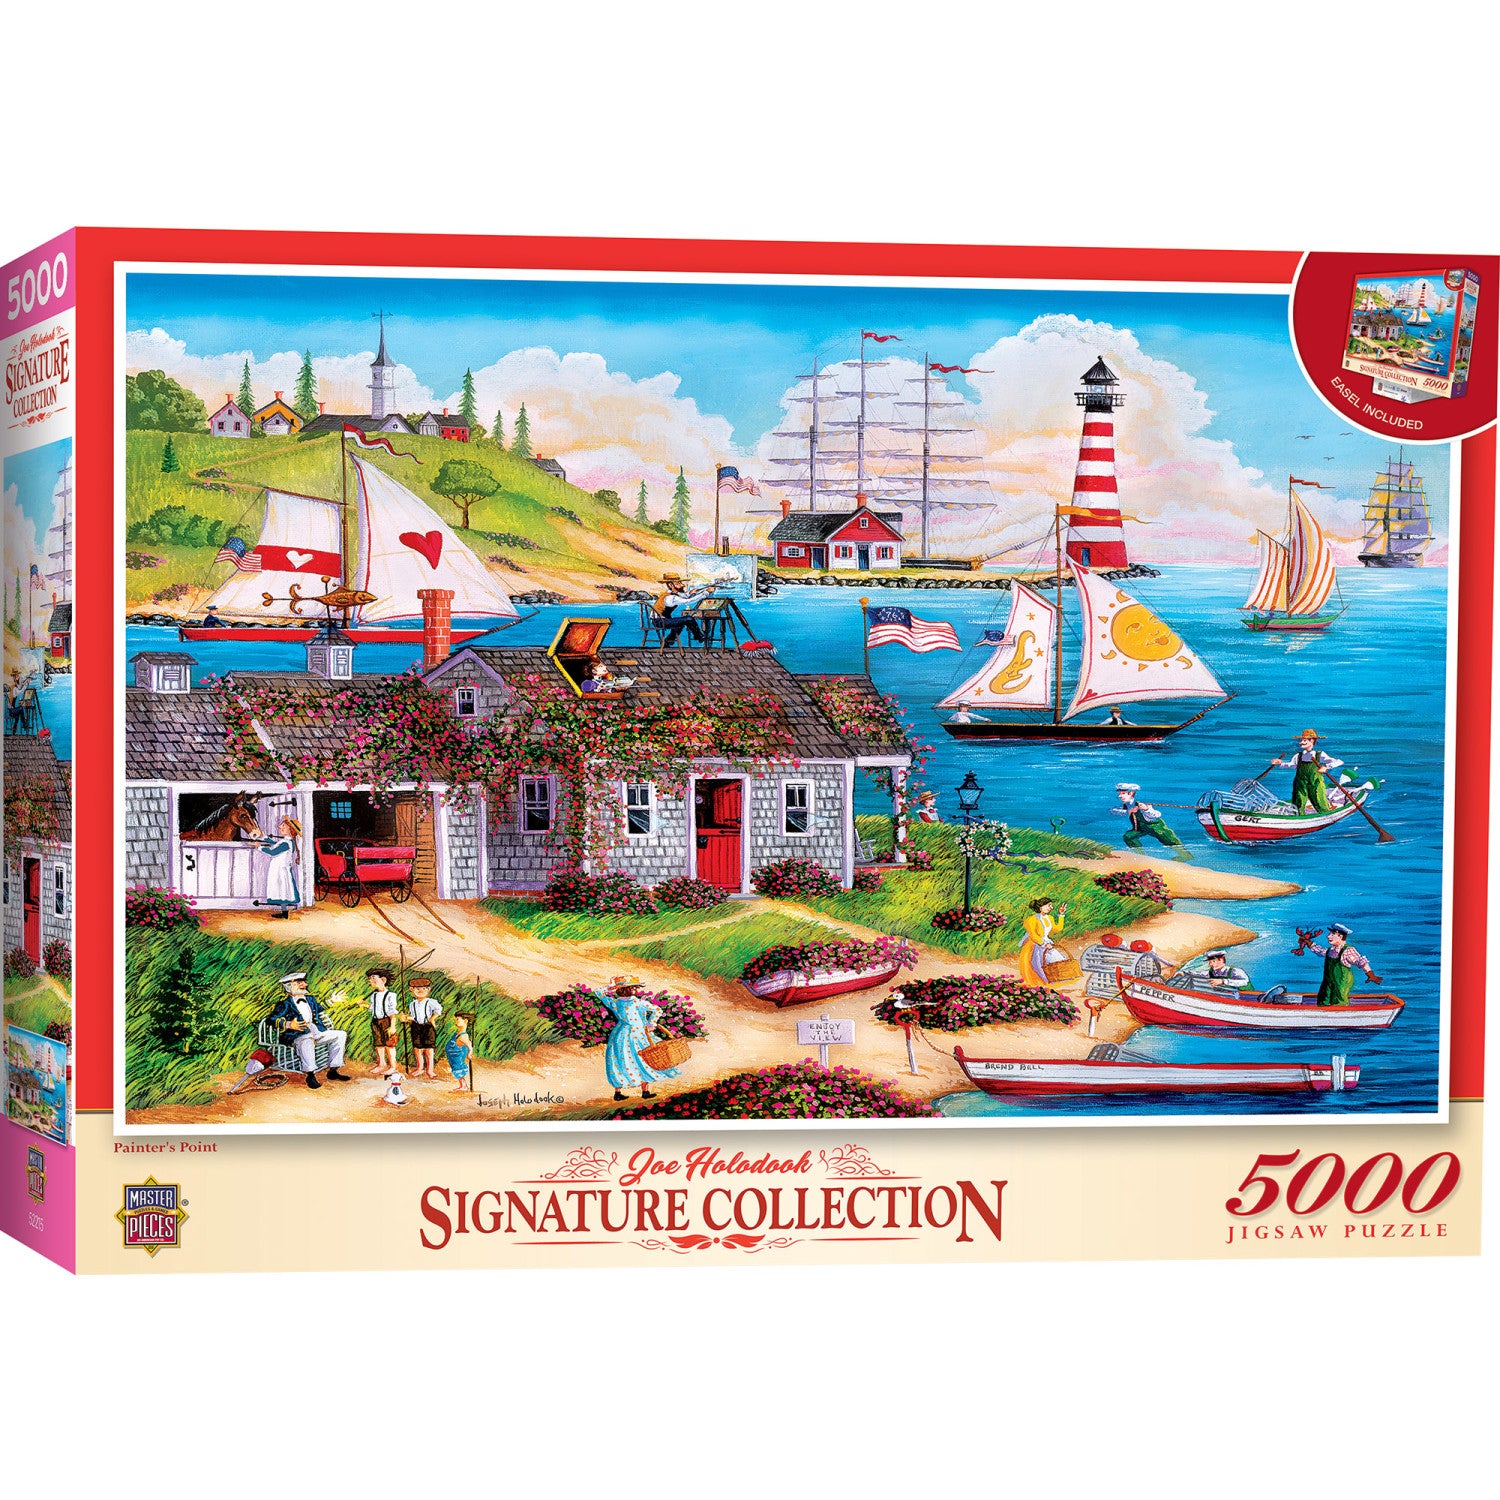 Signature Collection - Painter's Point 5000 Piece Jigsaw Puzzle - Flawed